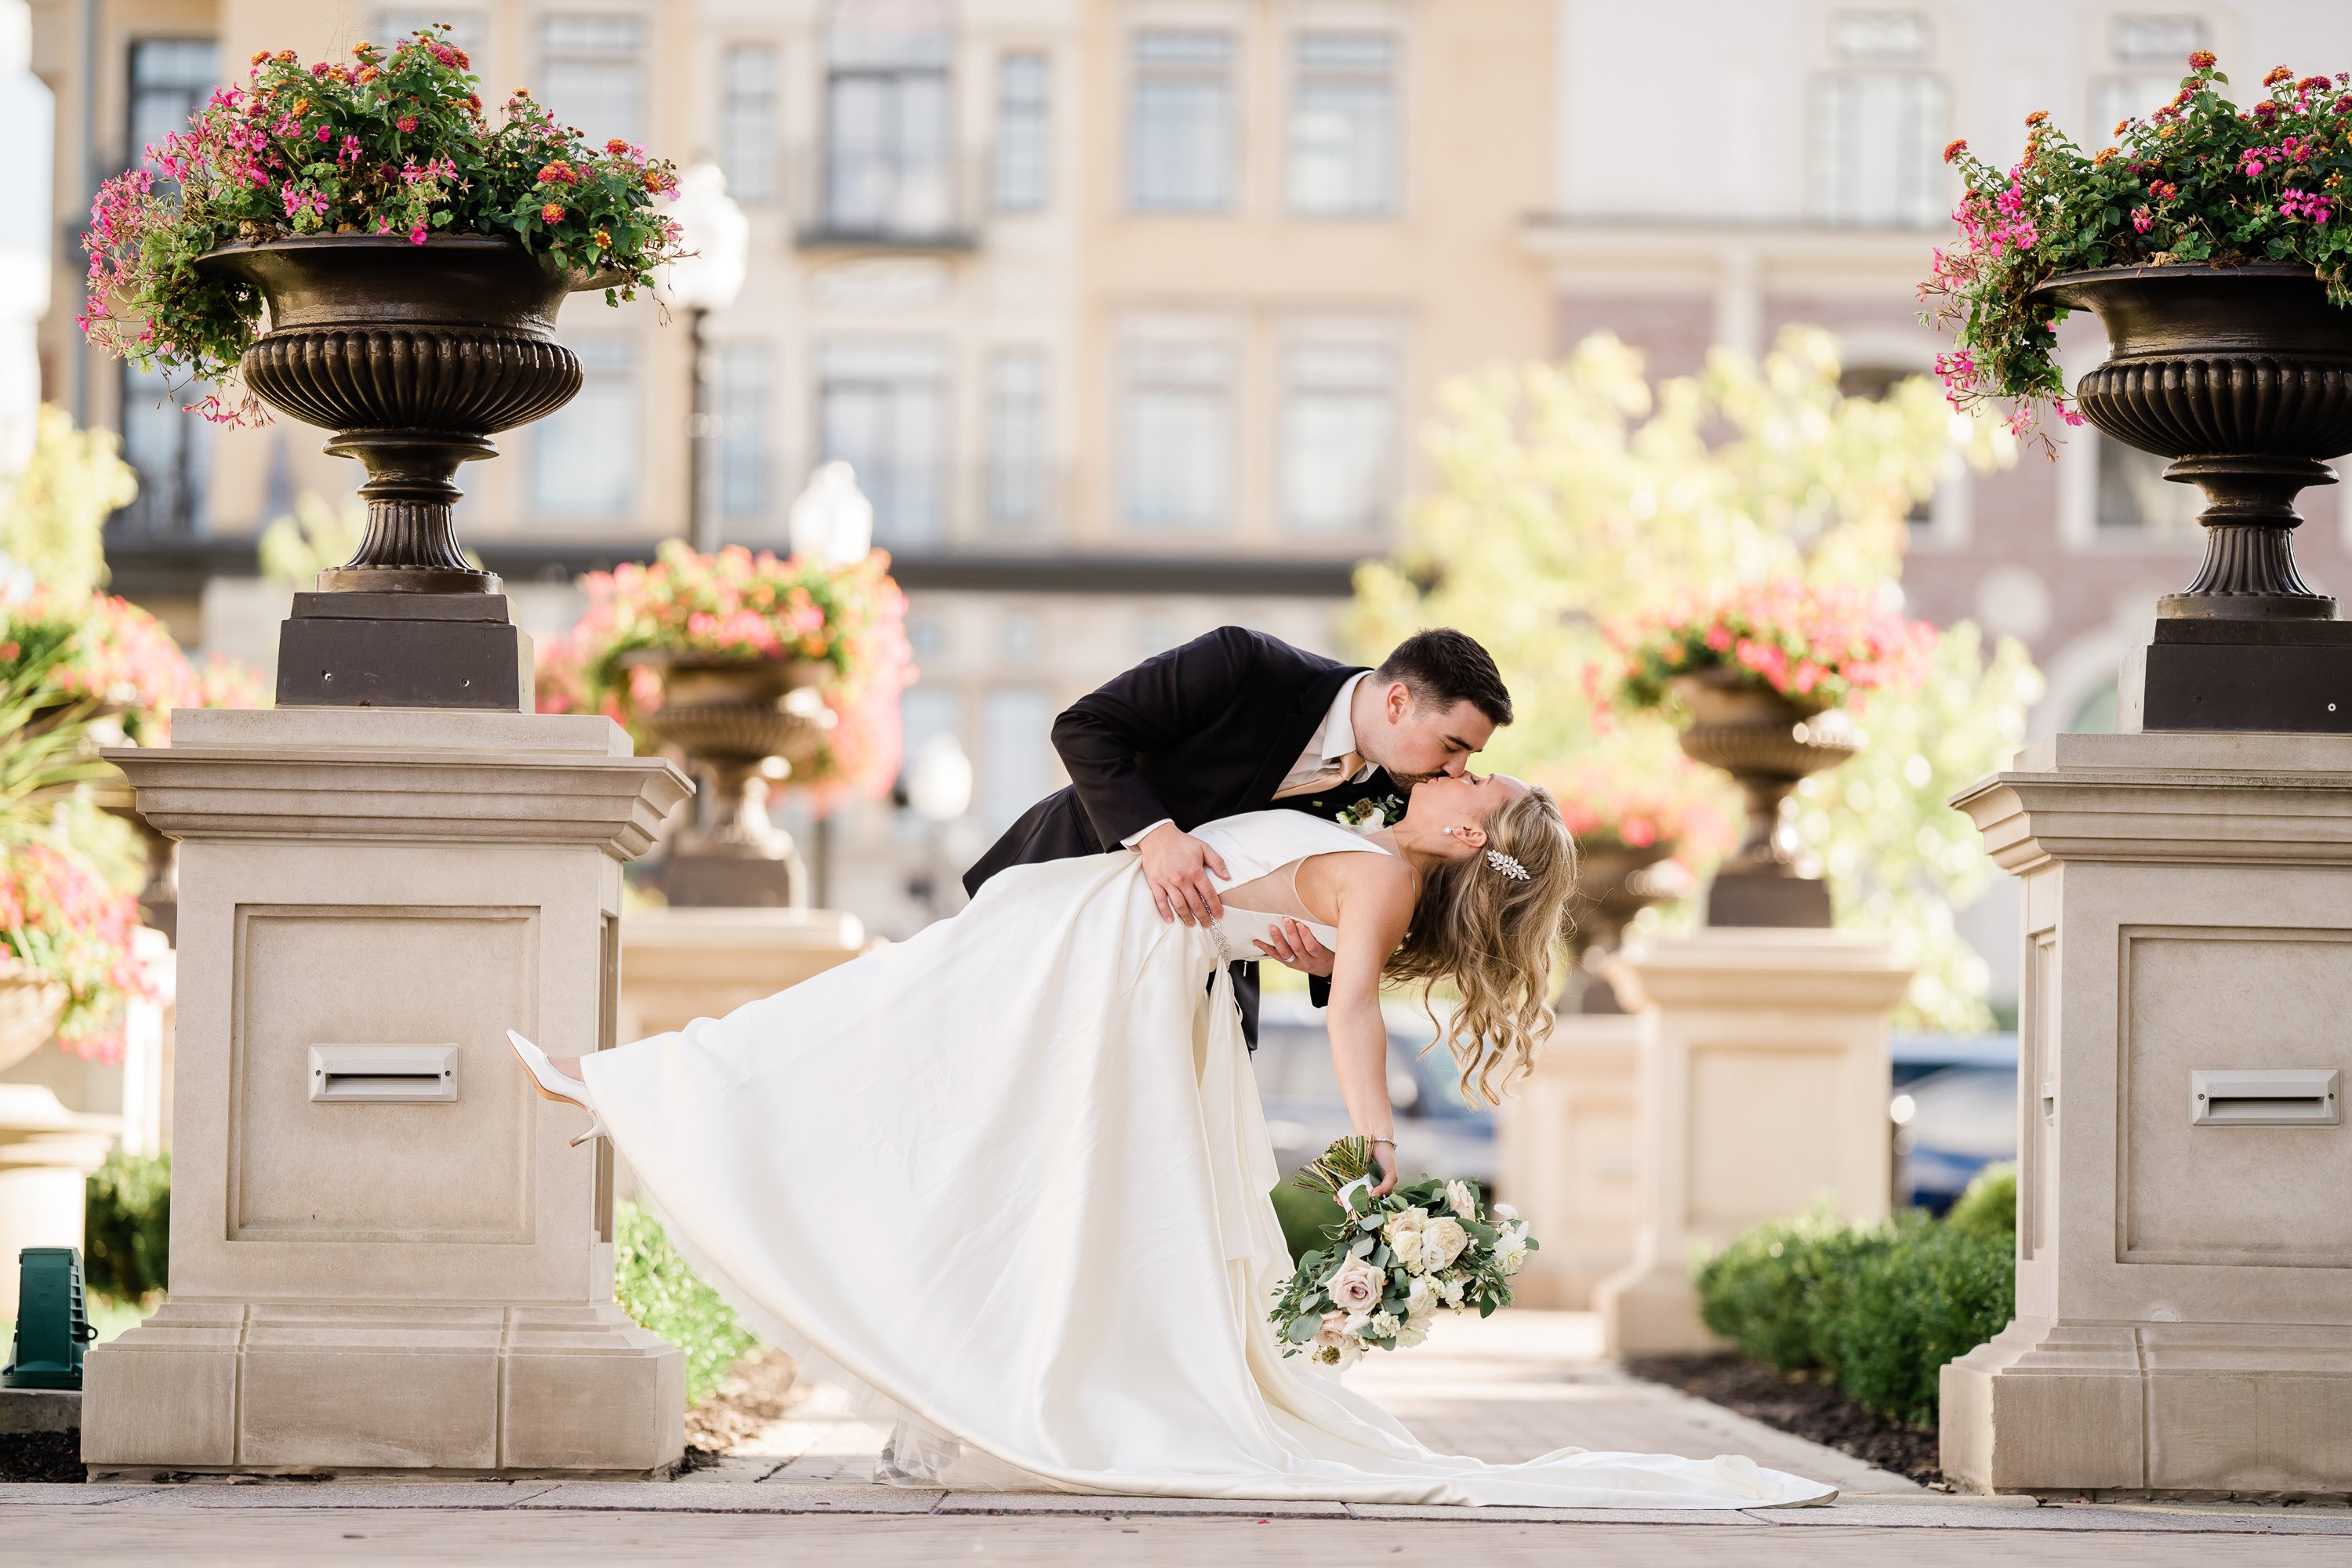 groom dipping his bride backwards and kissing her as they dance in a courtyard